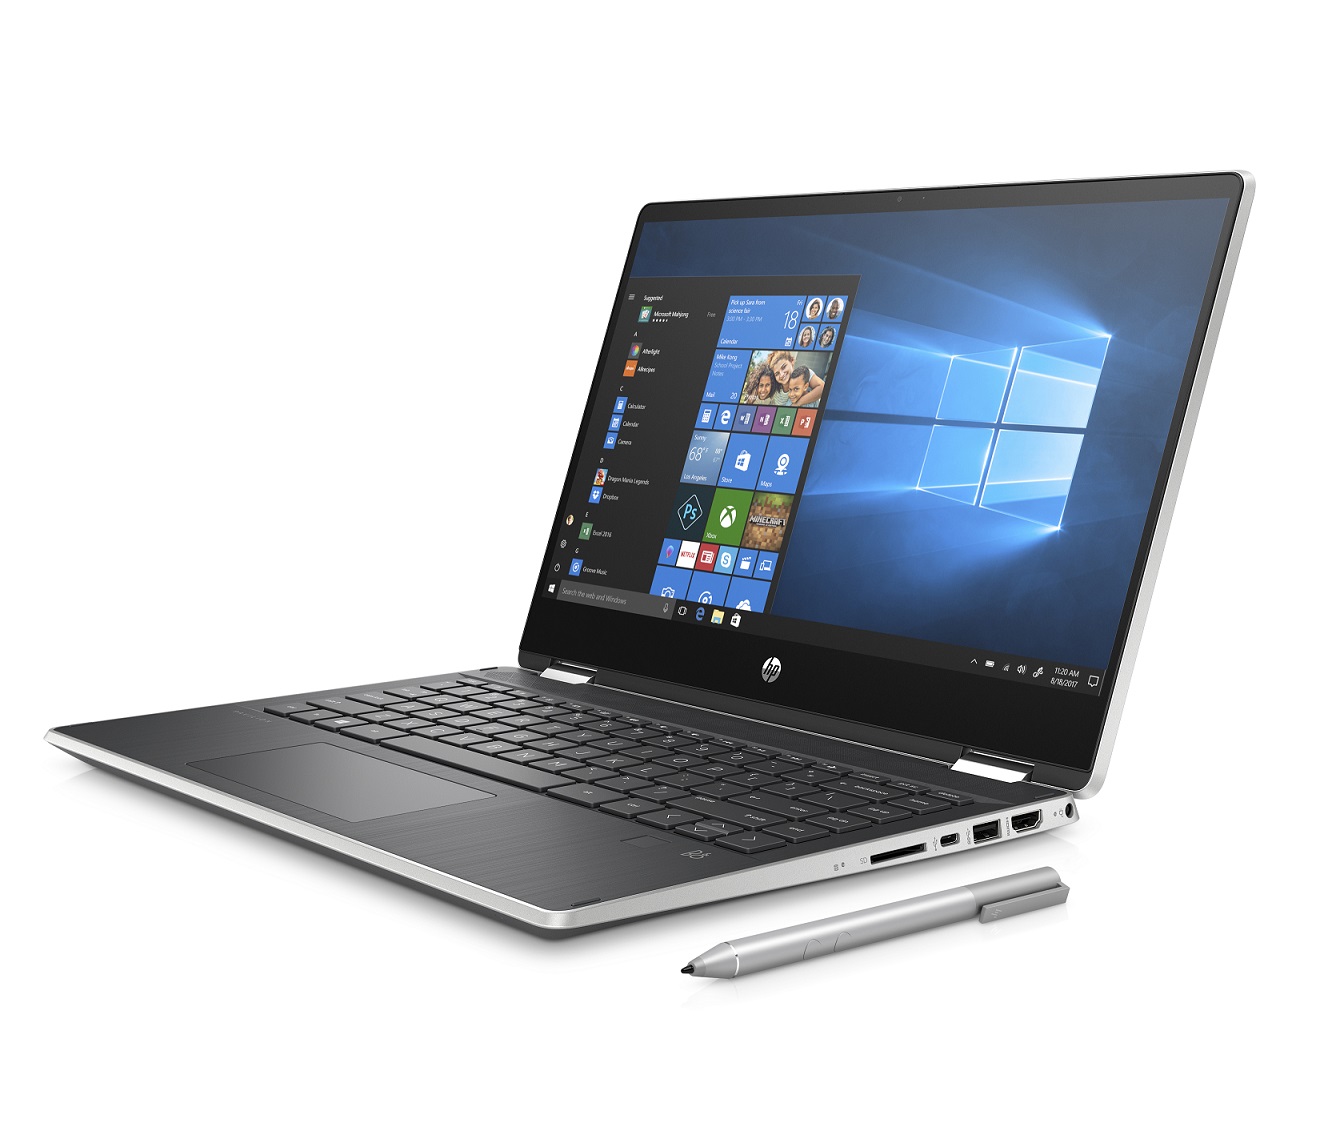 HP gifts GCash credits to PC buyers this Christmas in extended promo